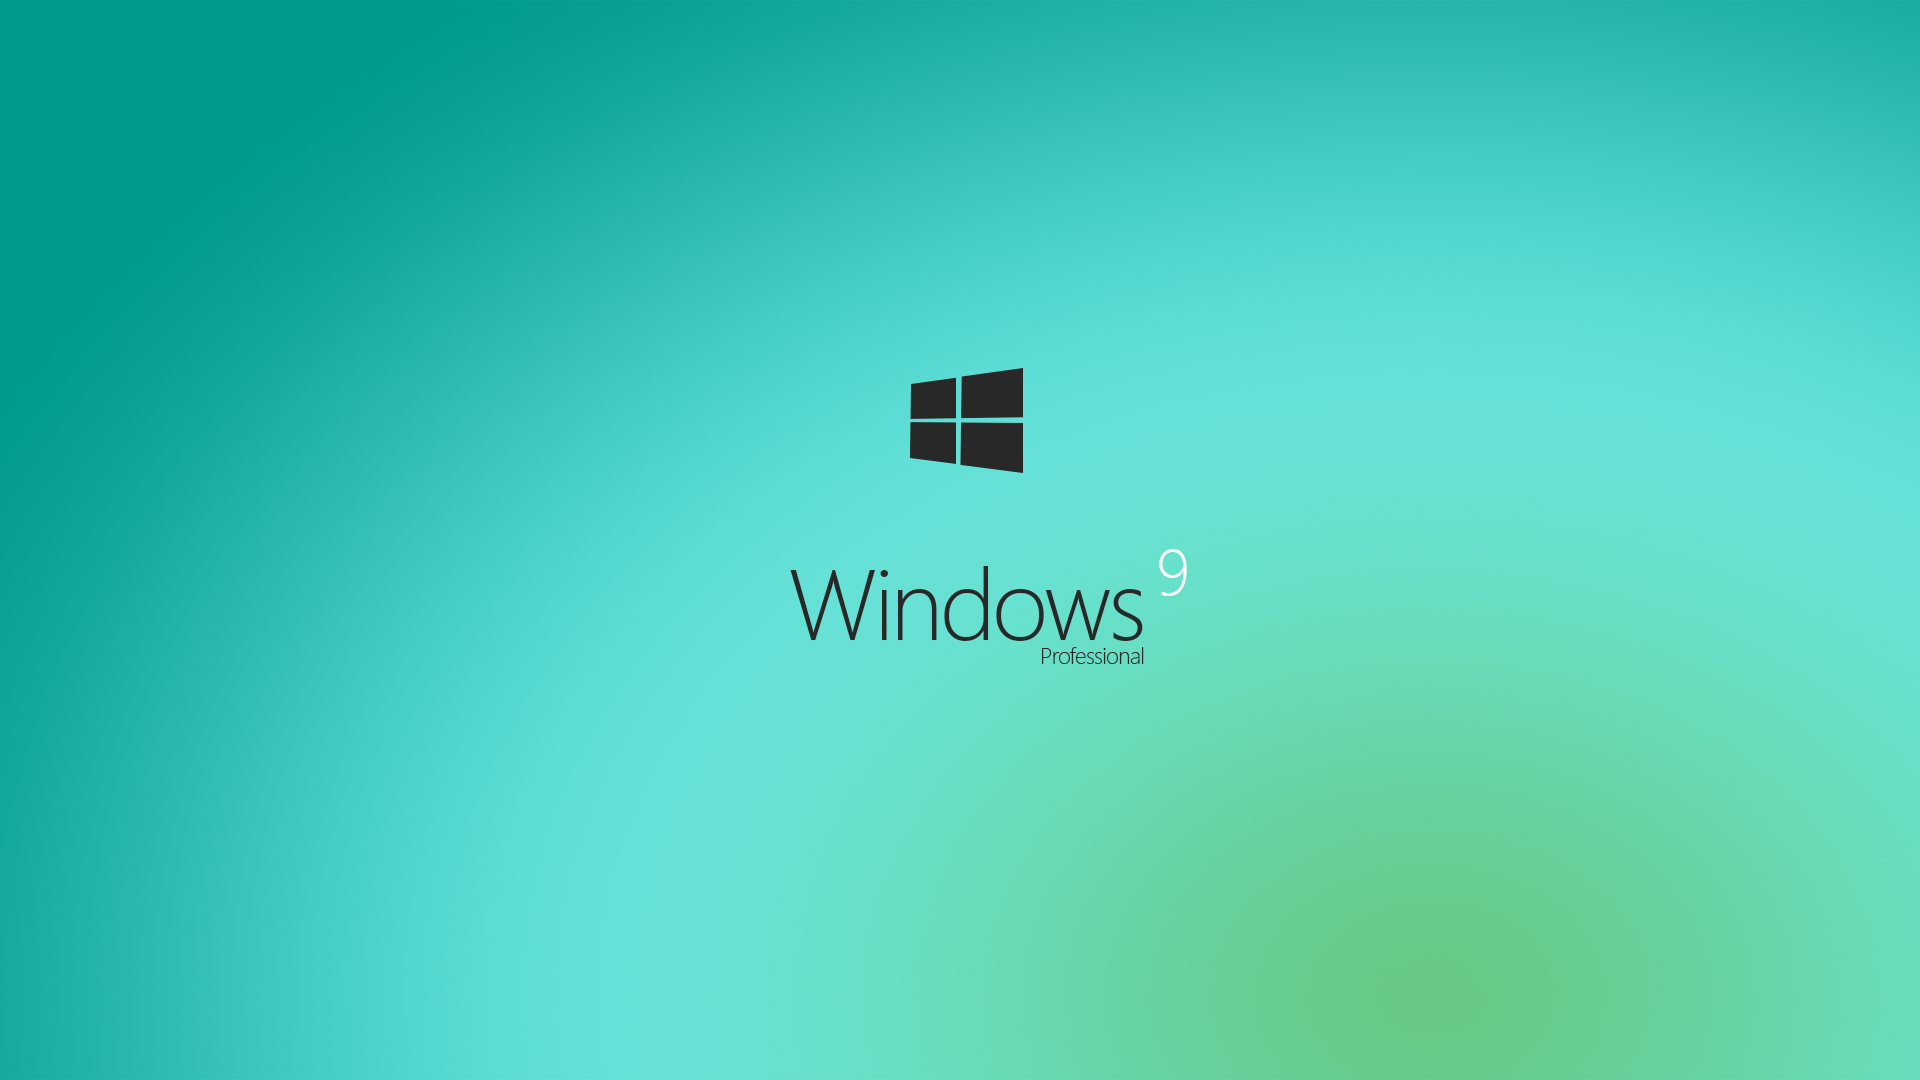 Windows 9   Wallpaper HD Concept by danielskrzypon on